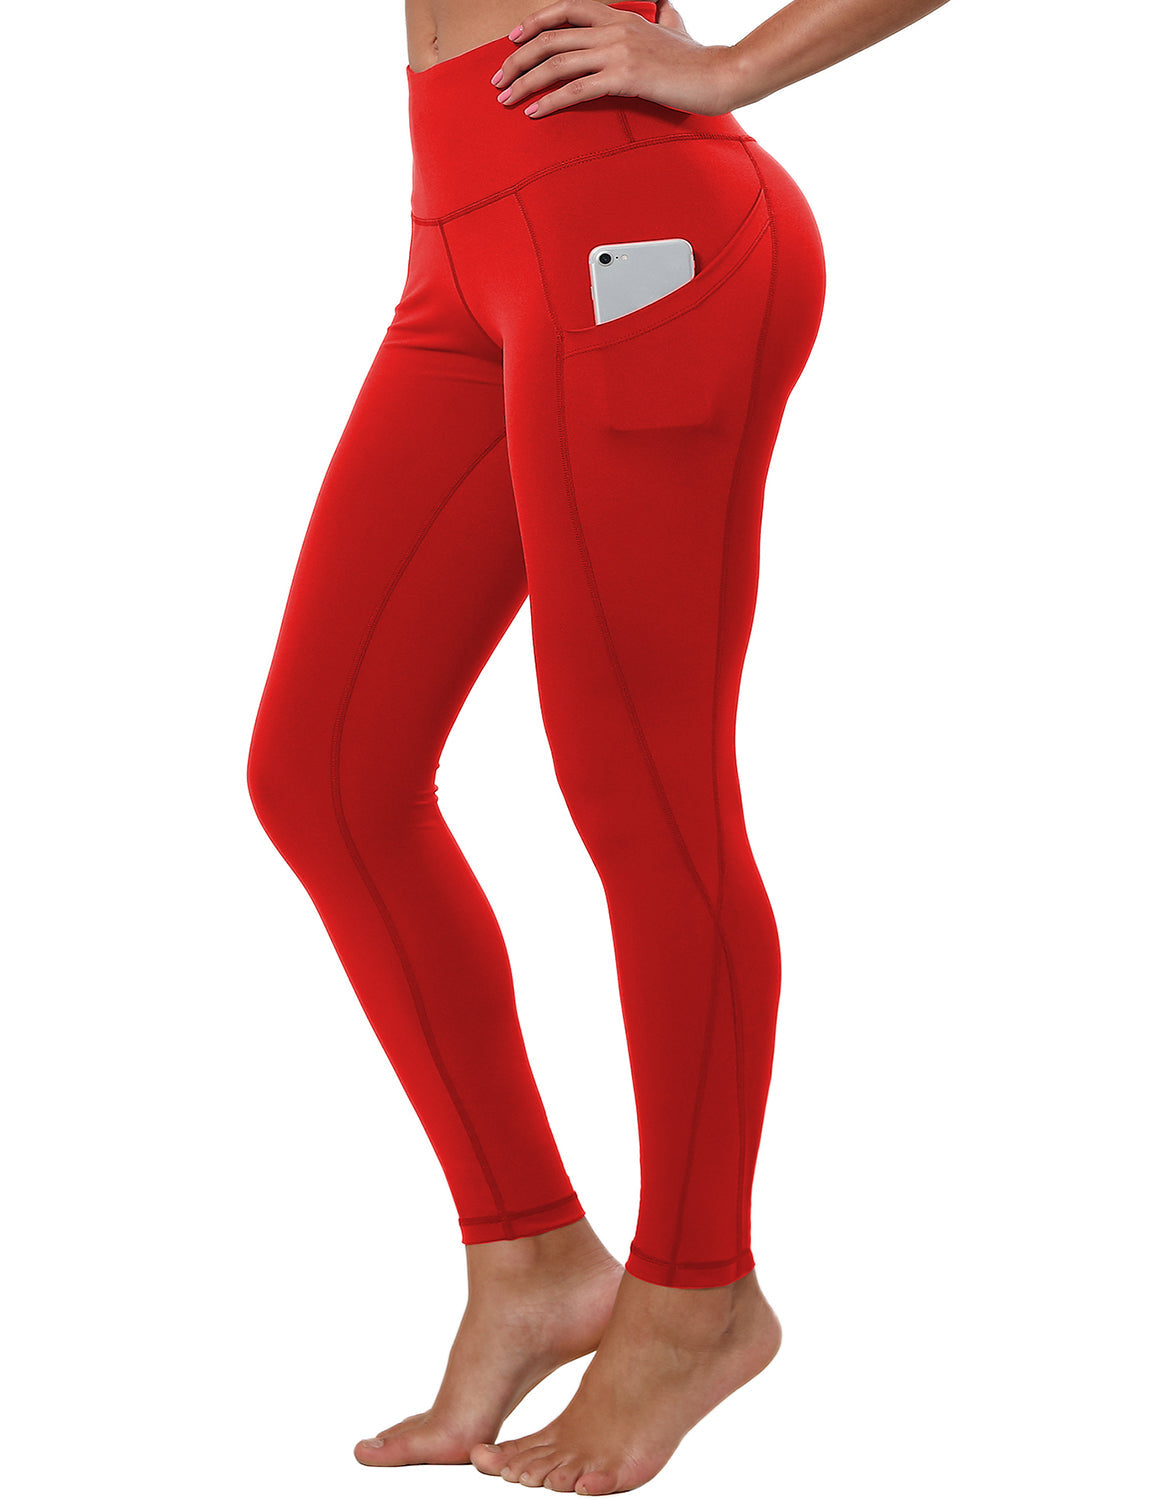 High Waist Side Pockets Gym Pants scarlet 75% Nylon, 25% Spandex Fabric doesn't attract lint easily 4-way stretch No see-through Moisture-wicking Tummy control Inner pocket